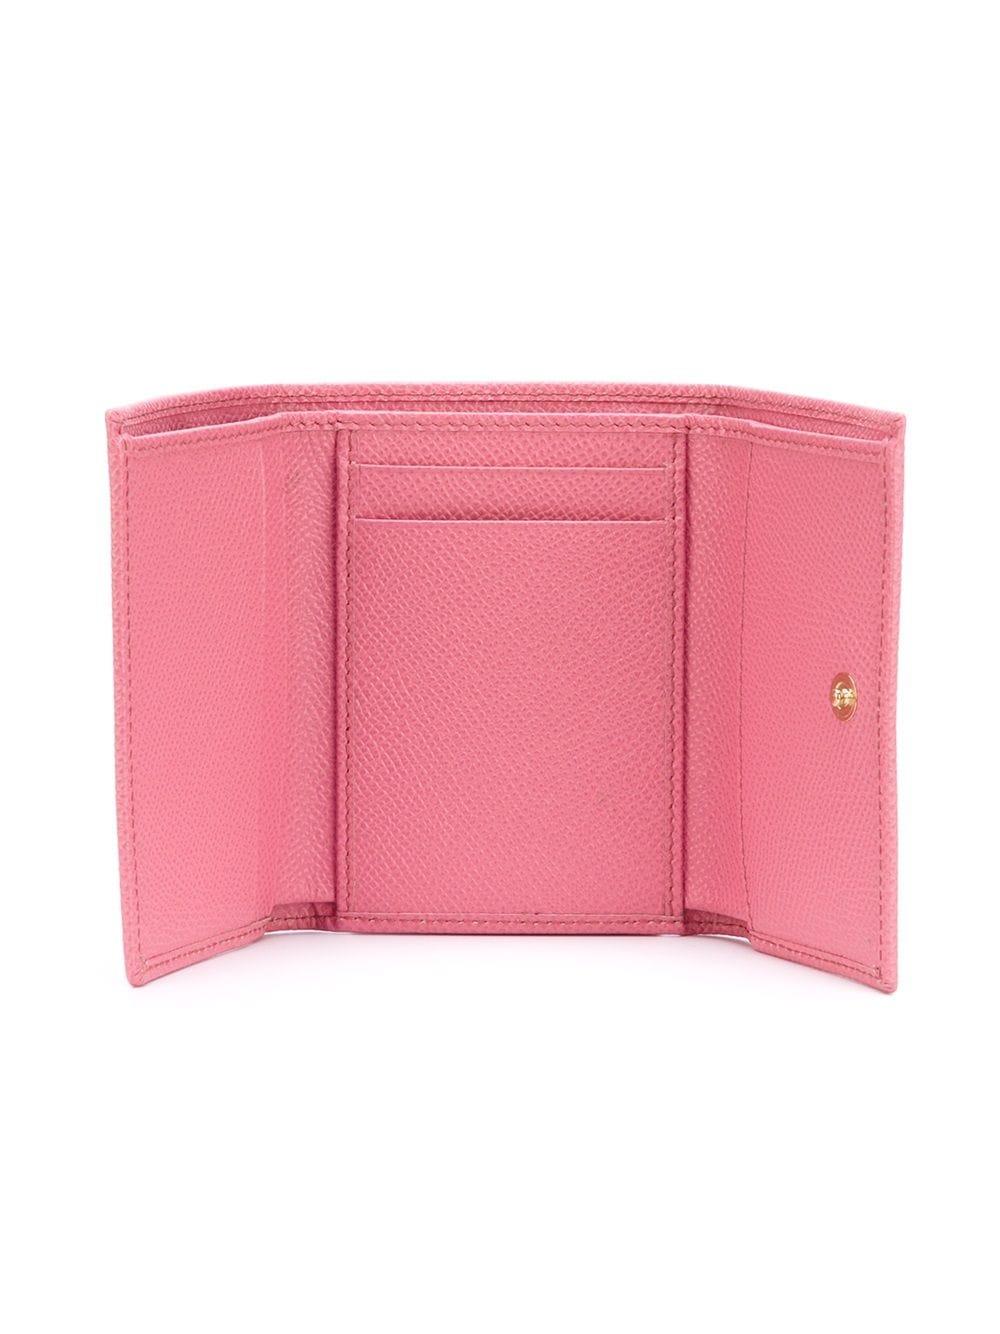 Dolce & Gabbana logo-tag leather wallet - Pink